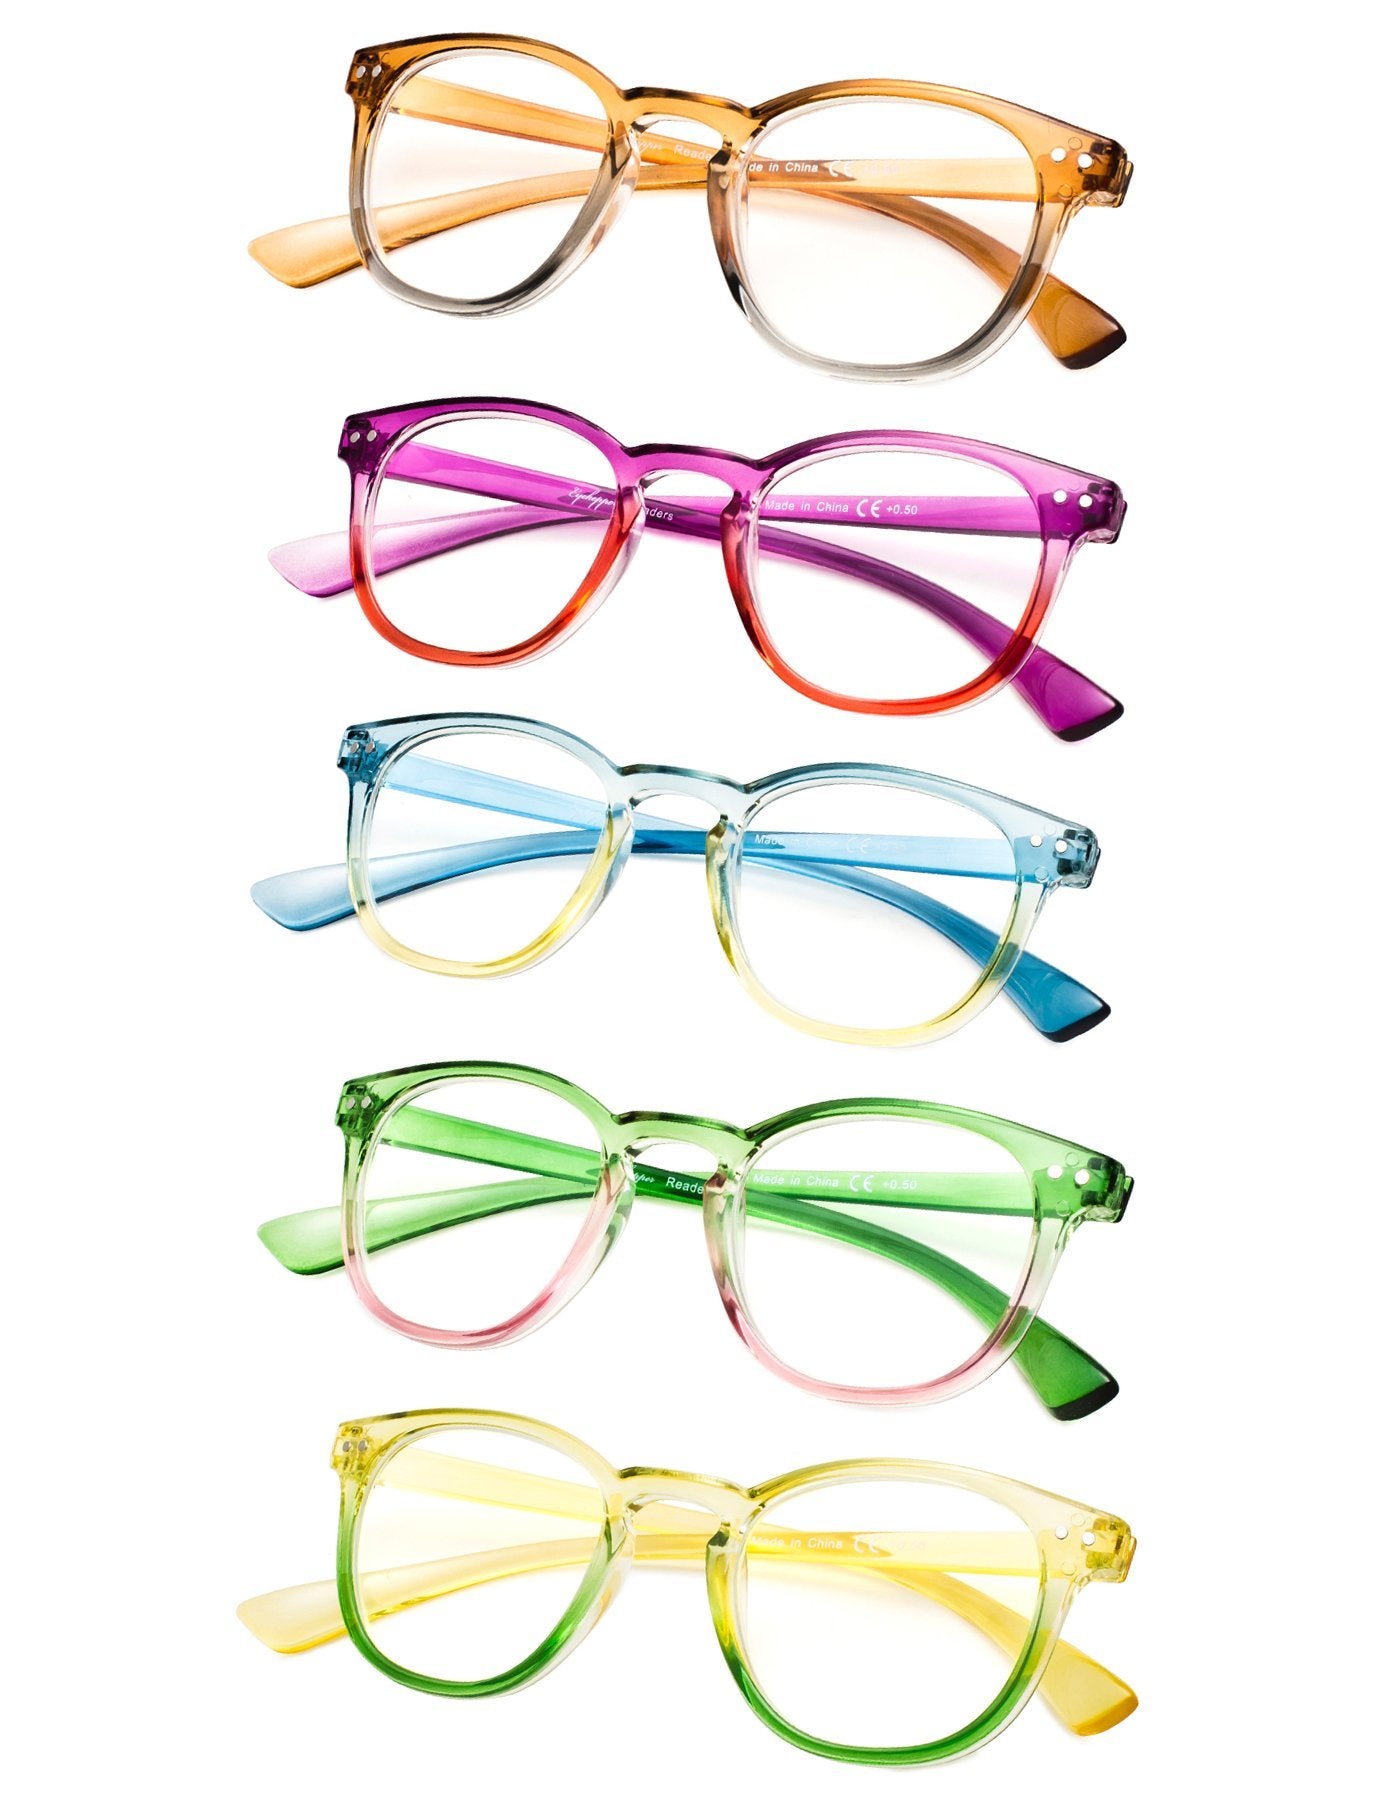 5 Pack Fashion Reading Glasses (One for each color) R144